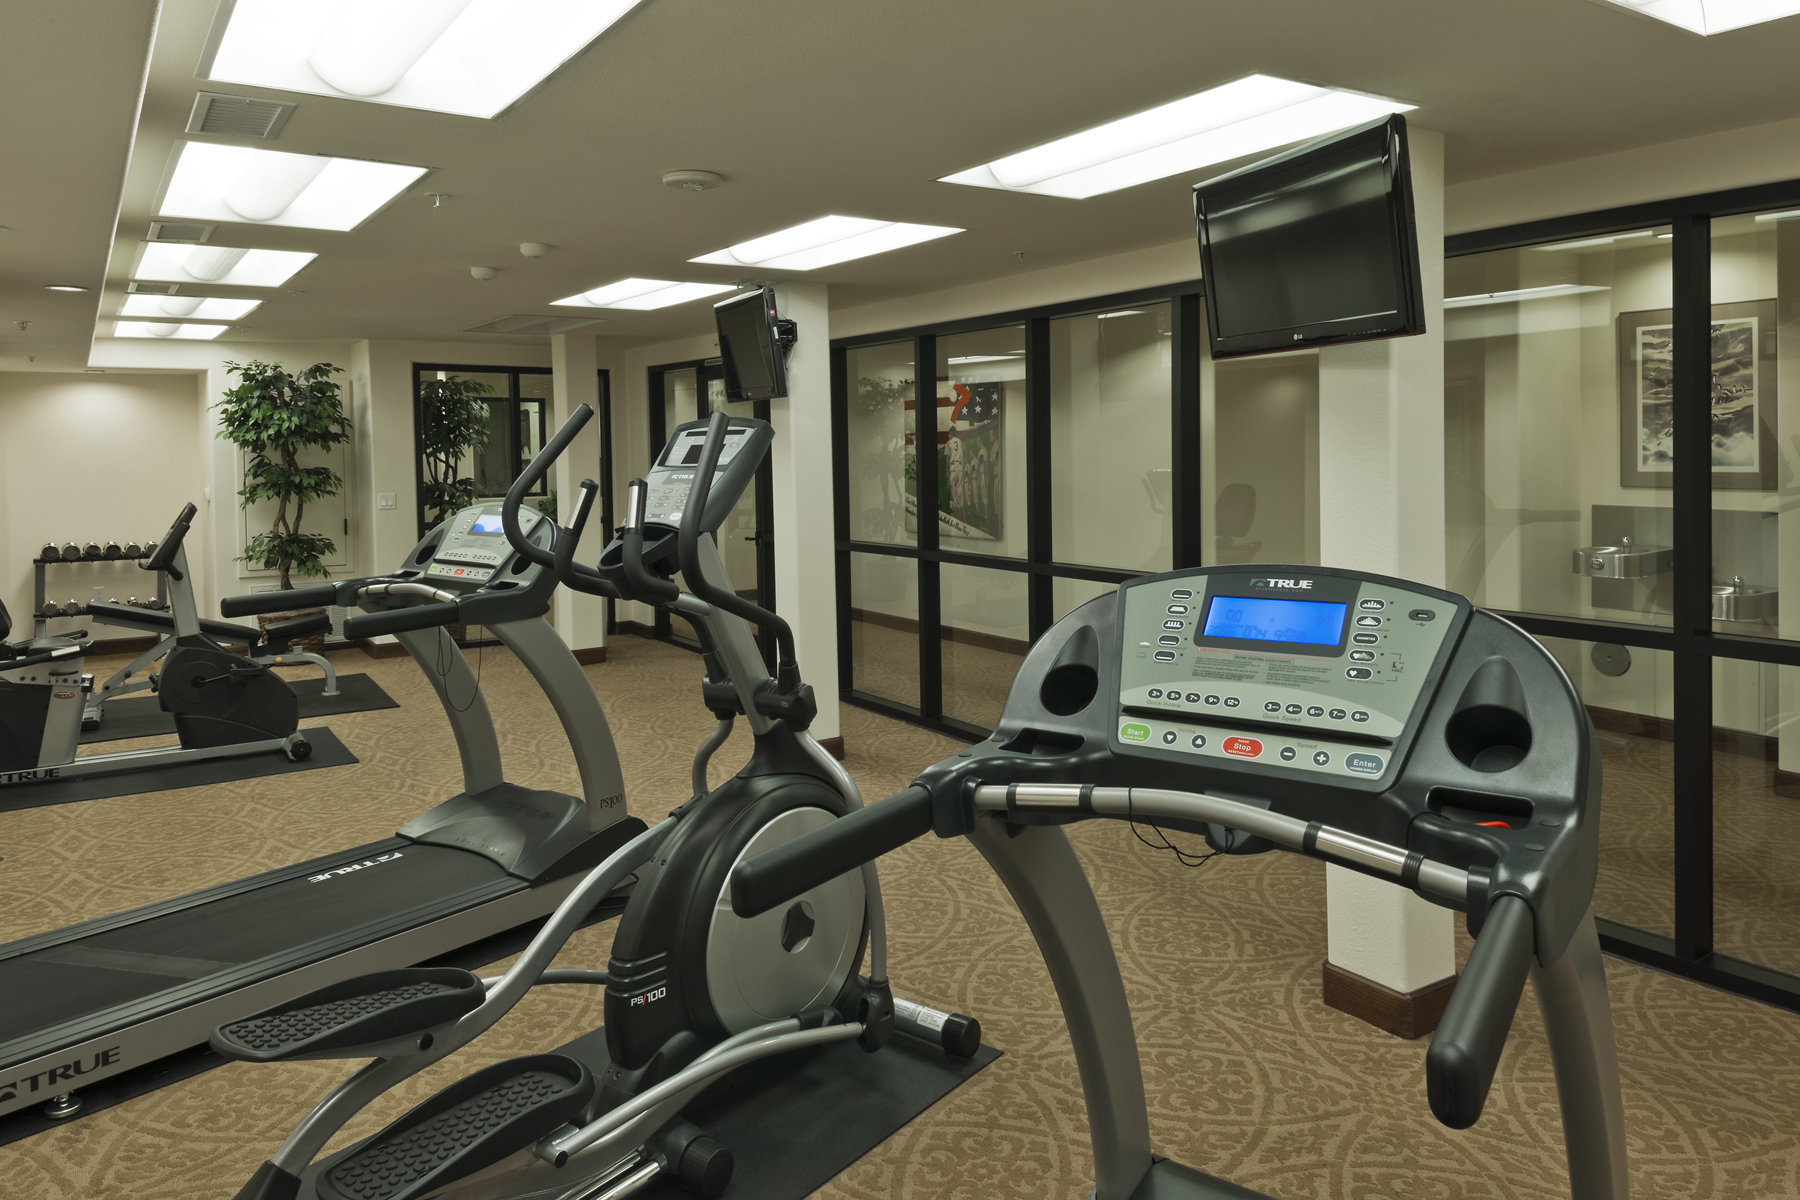 Dunbar village fitness center. Equipment available includes, treadmills, elliptical, workout bench, bike, and dumbbells. Two mounted tvs and ample lighting throughout room. The large glass windows to the hallway provides a sense of openness in the room. W